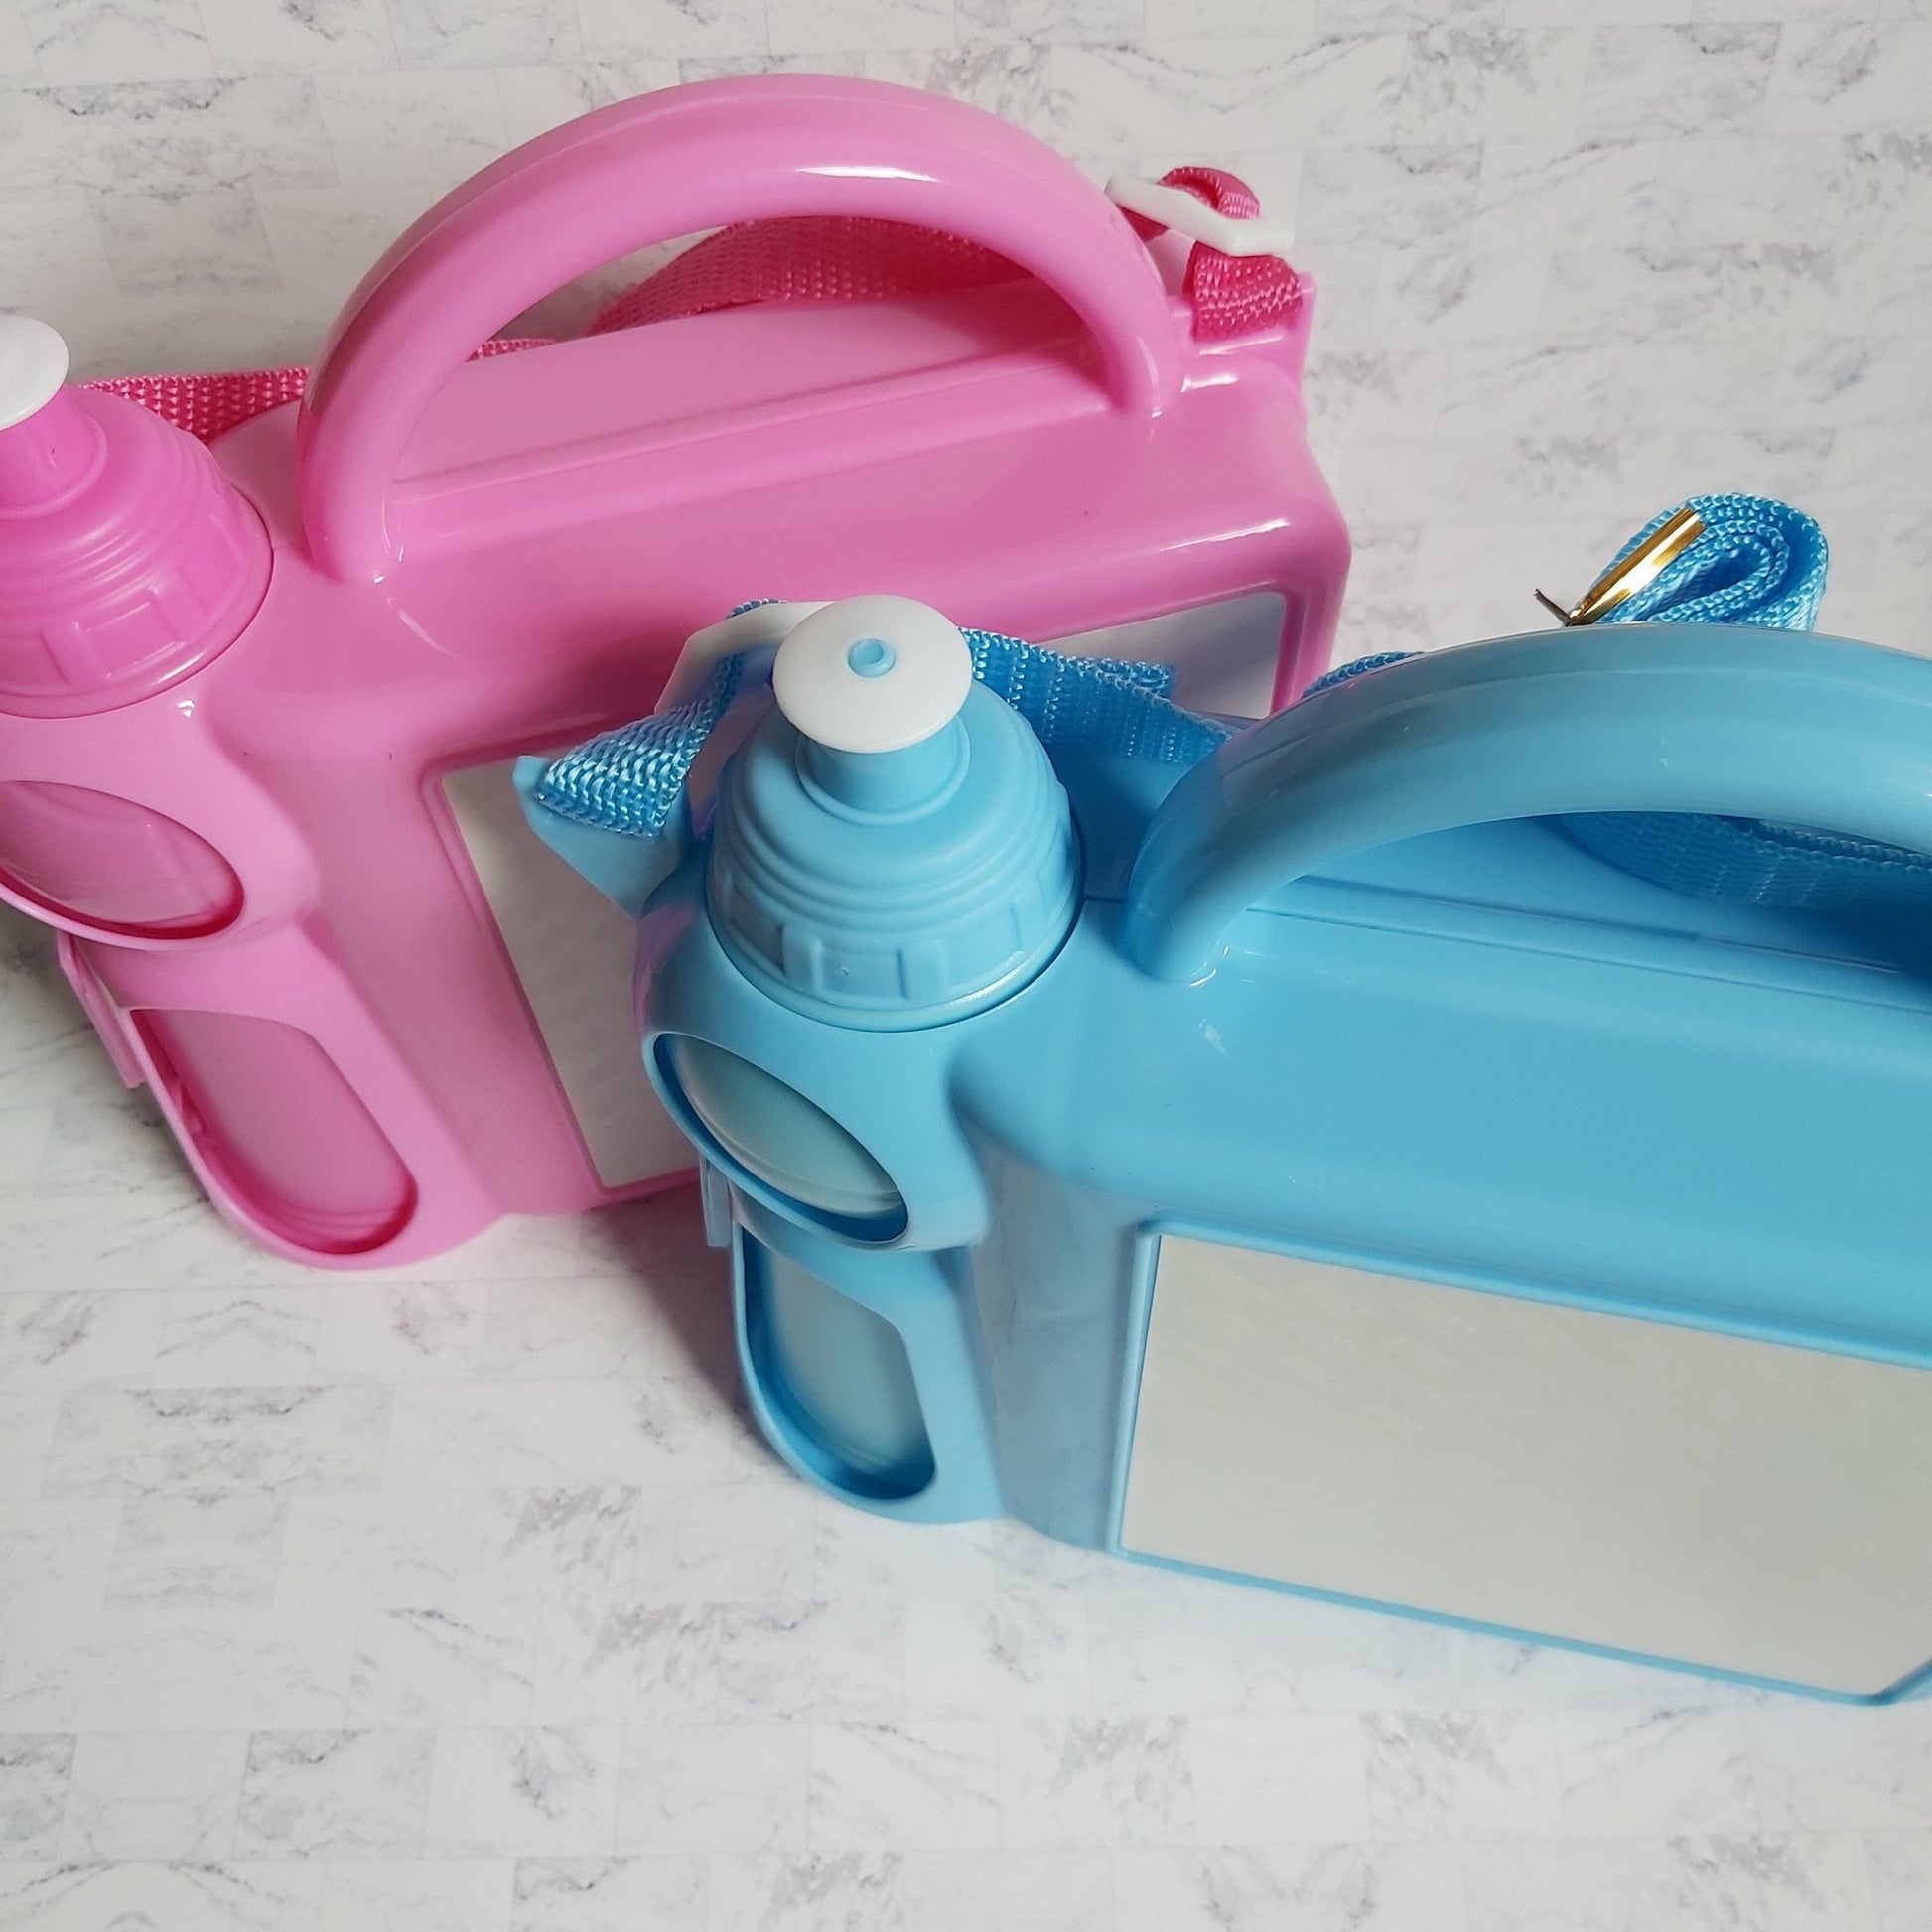 Fire engine lunch box with water bottle - Sew Tilley